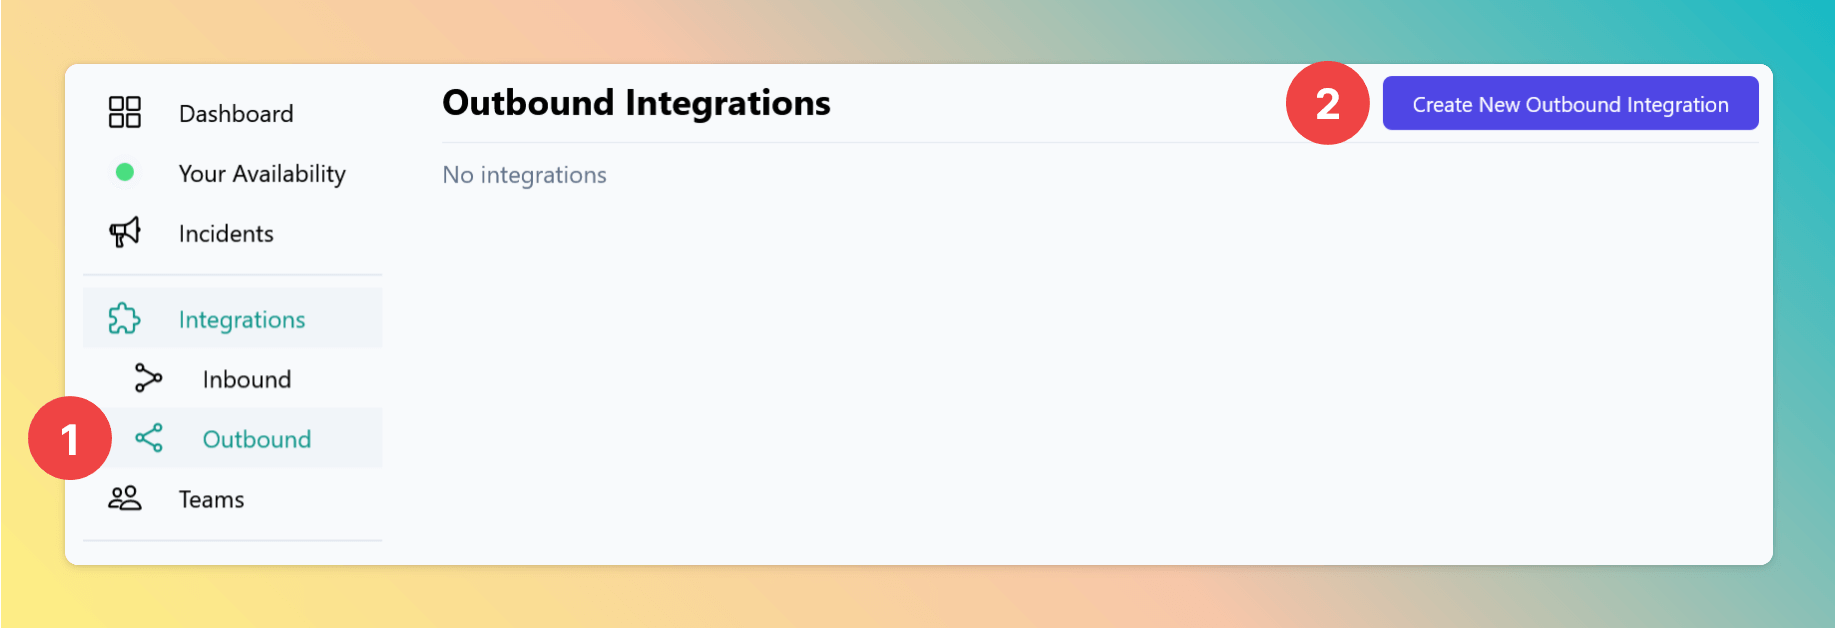 Outbound Integrations